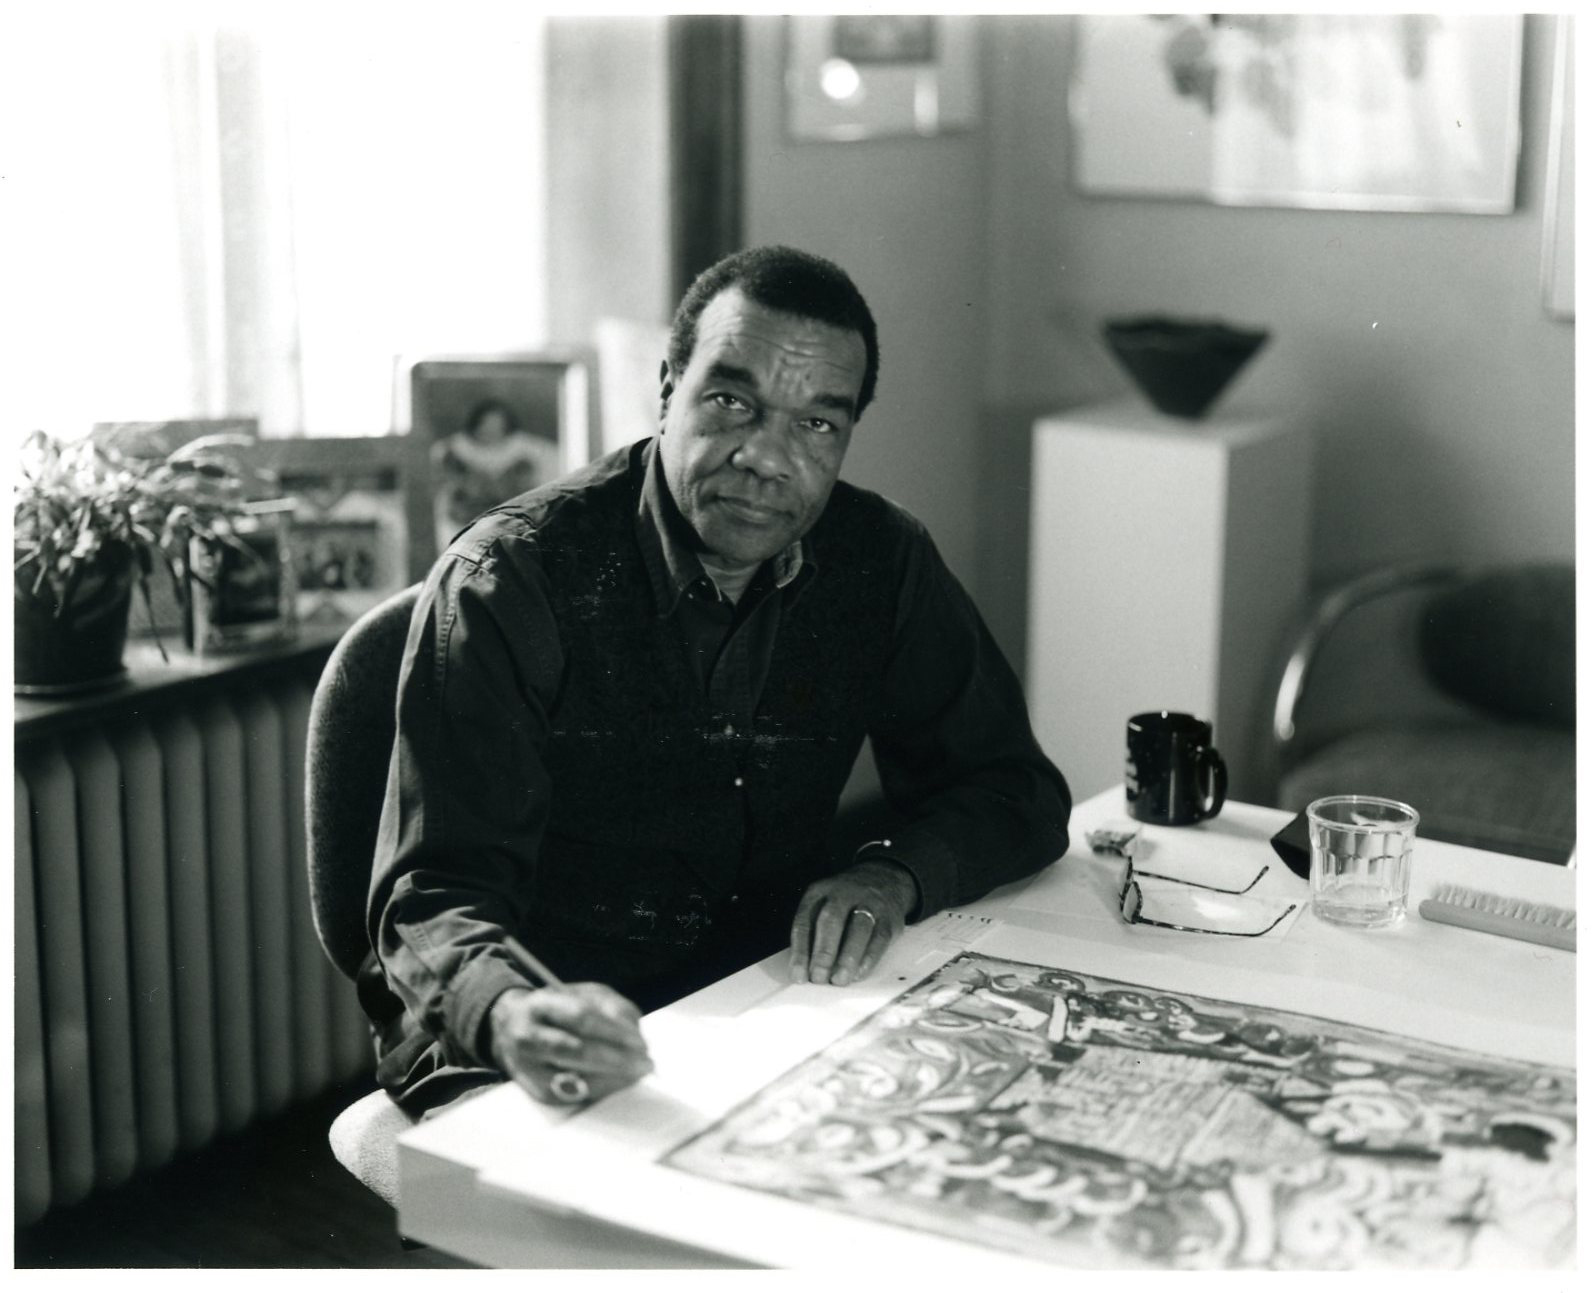 Professor David C. Driskell sitting in front of artwork in black and white